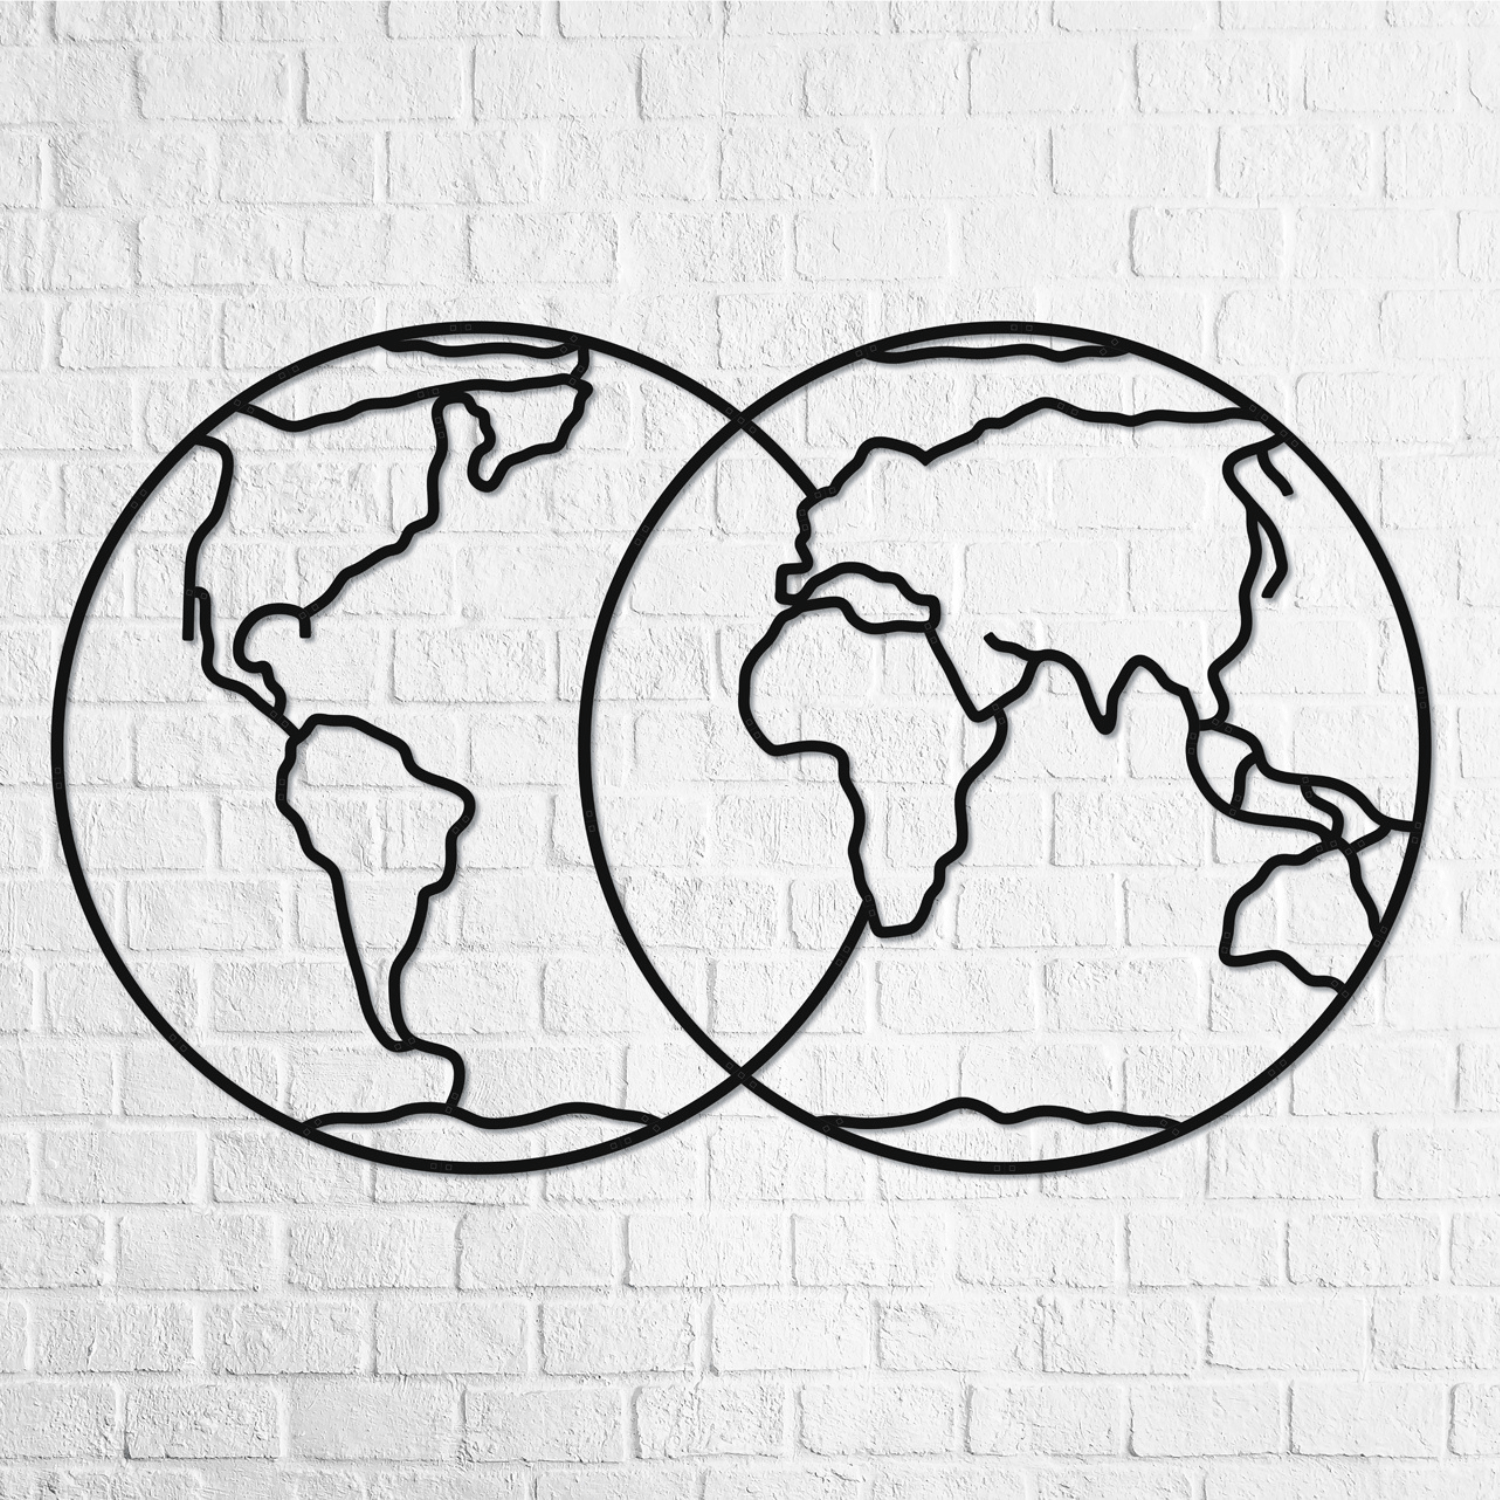 Hemispheres of the Earth | wall puzzle wall puzzle eco wood art--